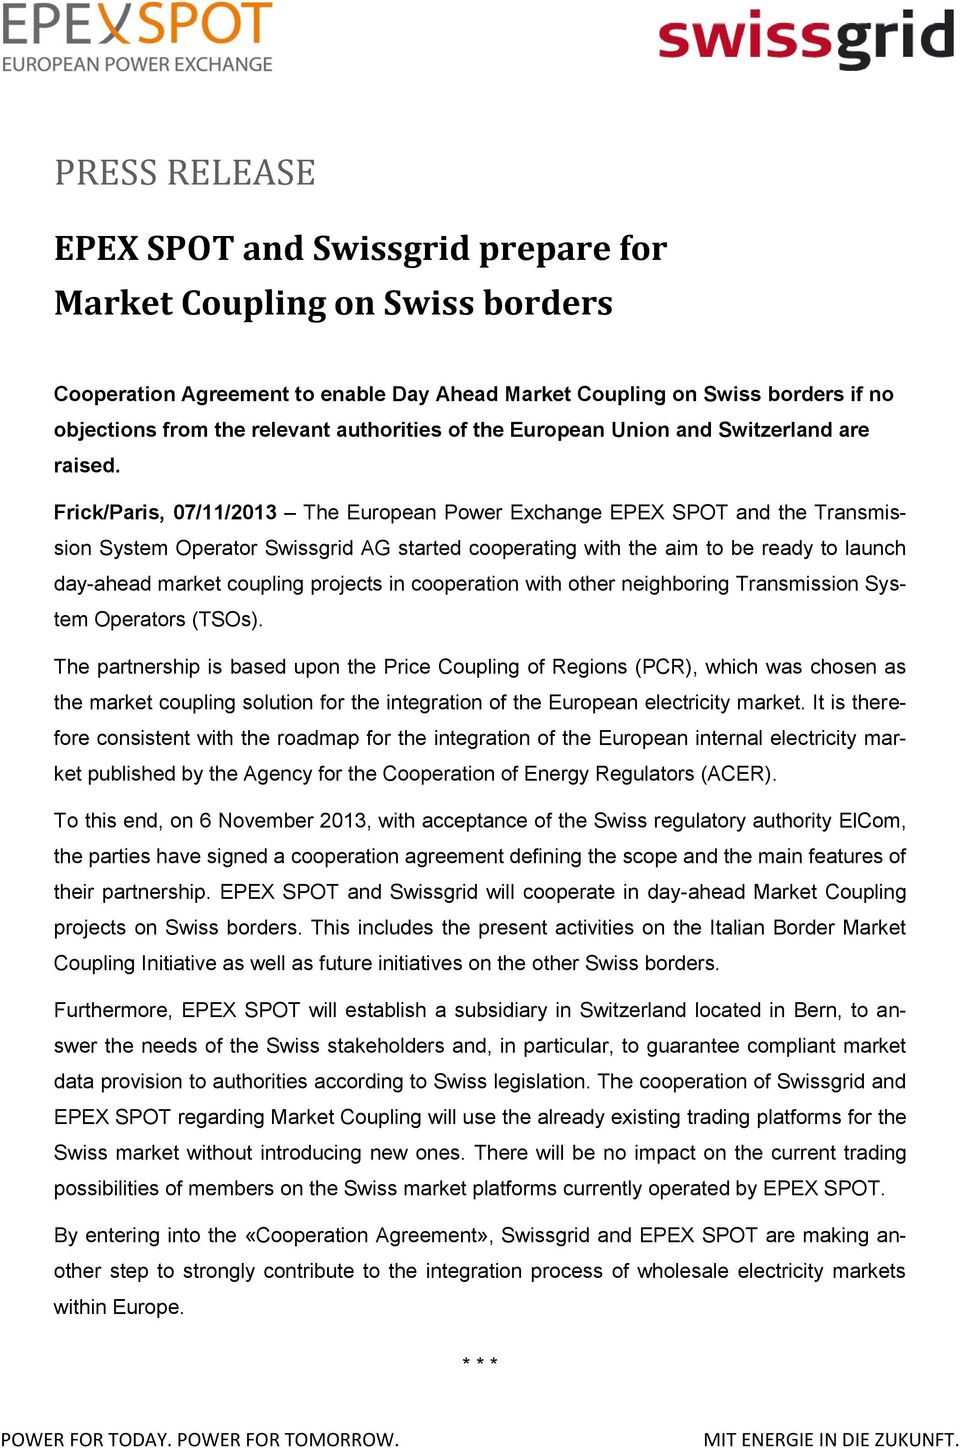 Frick/Paris, 07/11/2013 The European Power Exchange EPEX SPOT and the Transmission System Operator Swissgrid AG started cooperating with the aim to be ready to launch day-ahead market coupling